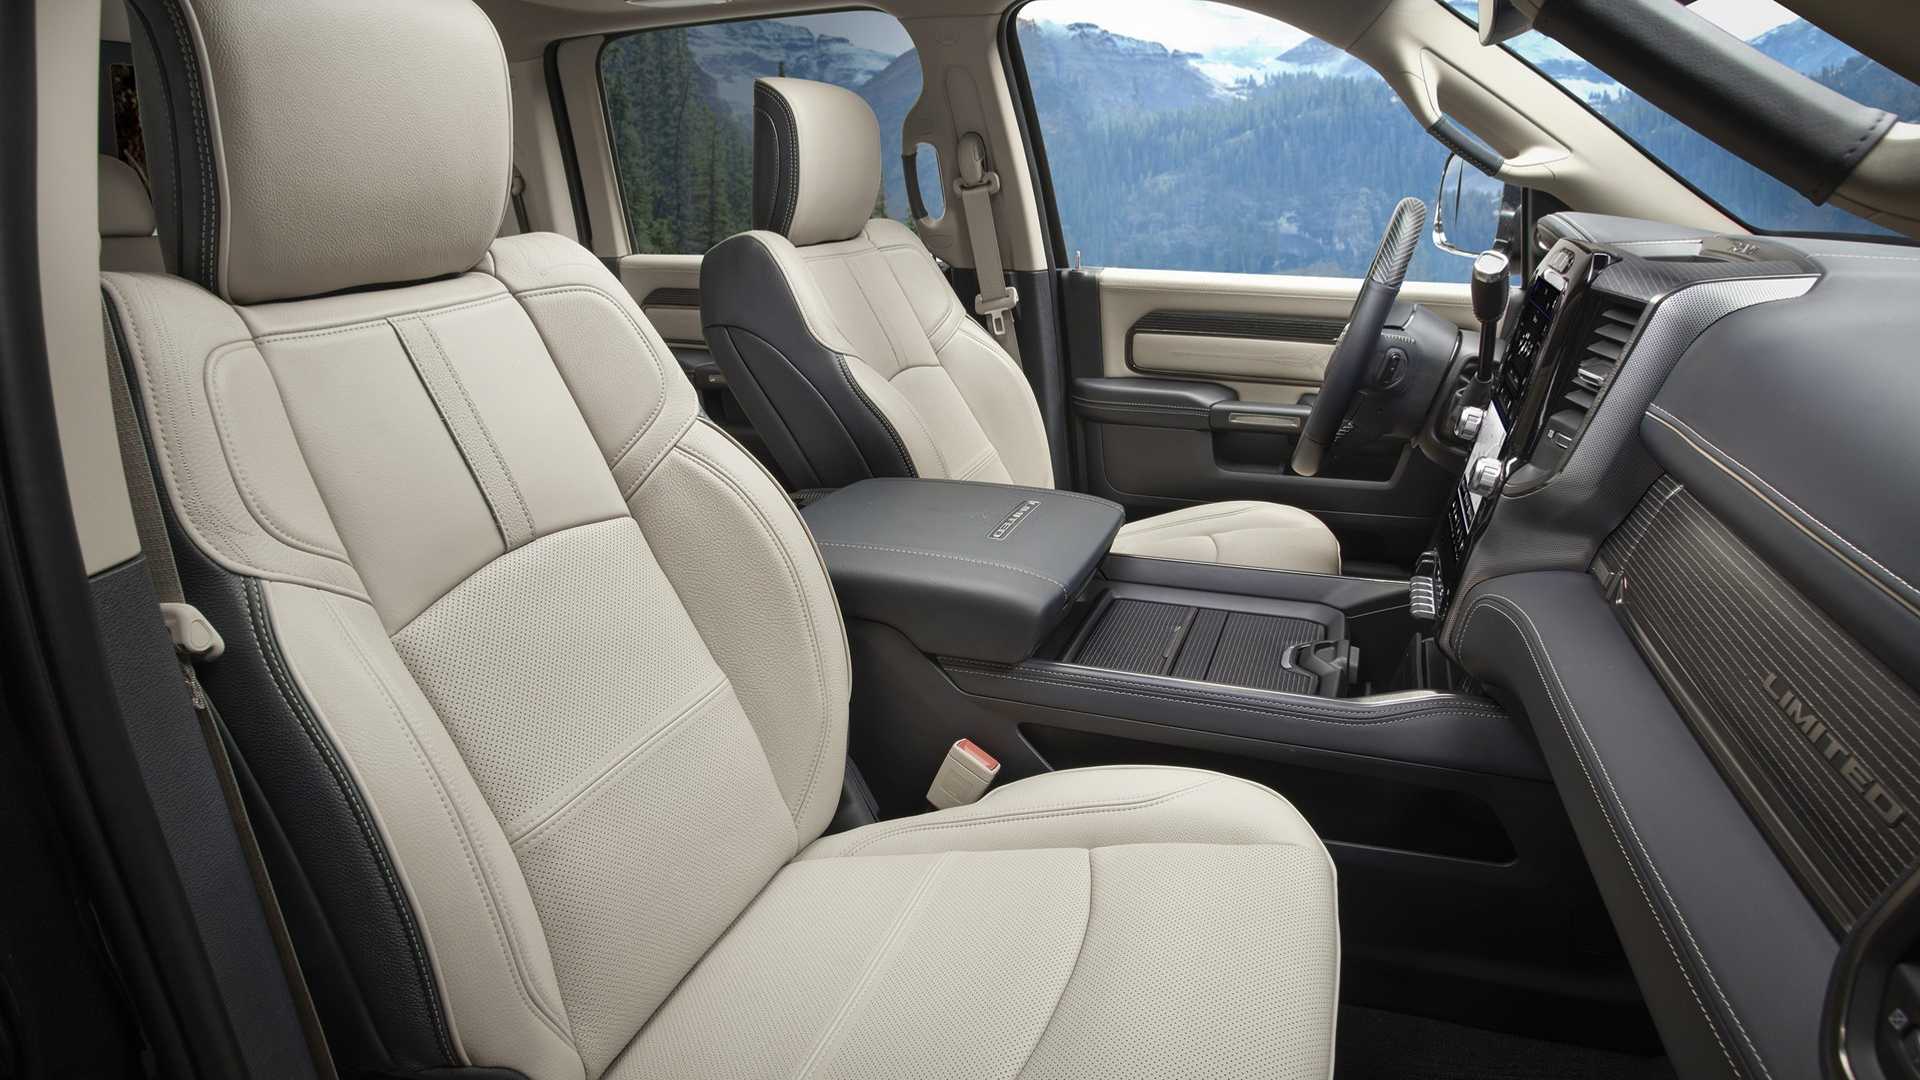 2019 Ram 2500 Heavy Duty Interior Front Seats Wallpapers #28 of 36